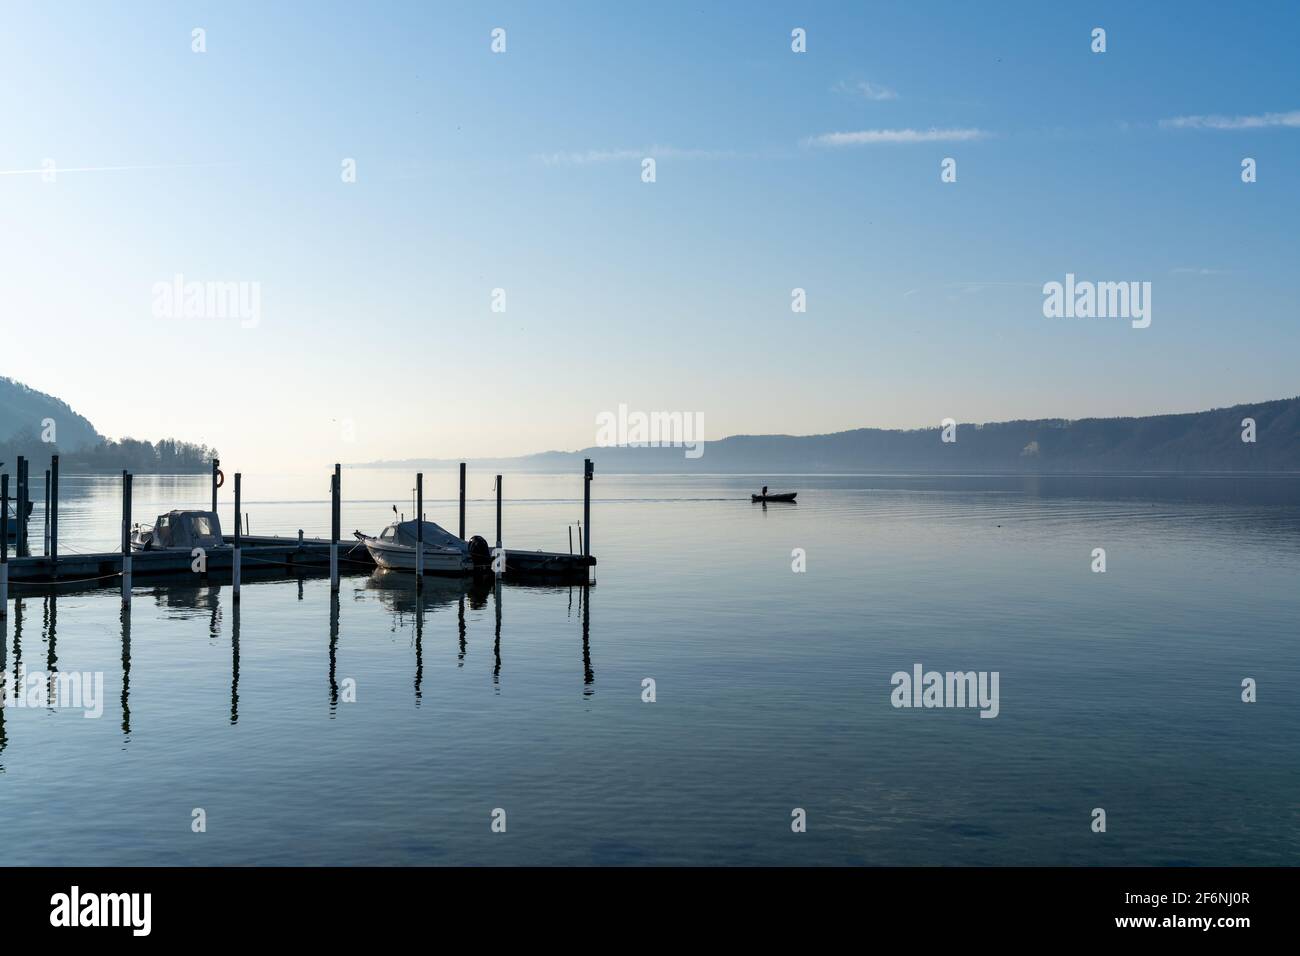 A view of a calm blue lake with moored ships and a small motorboat cruising through the water Stock Photo